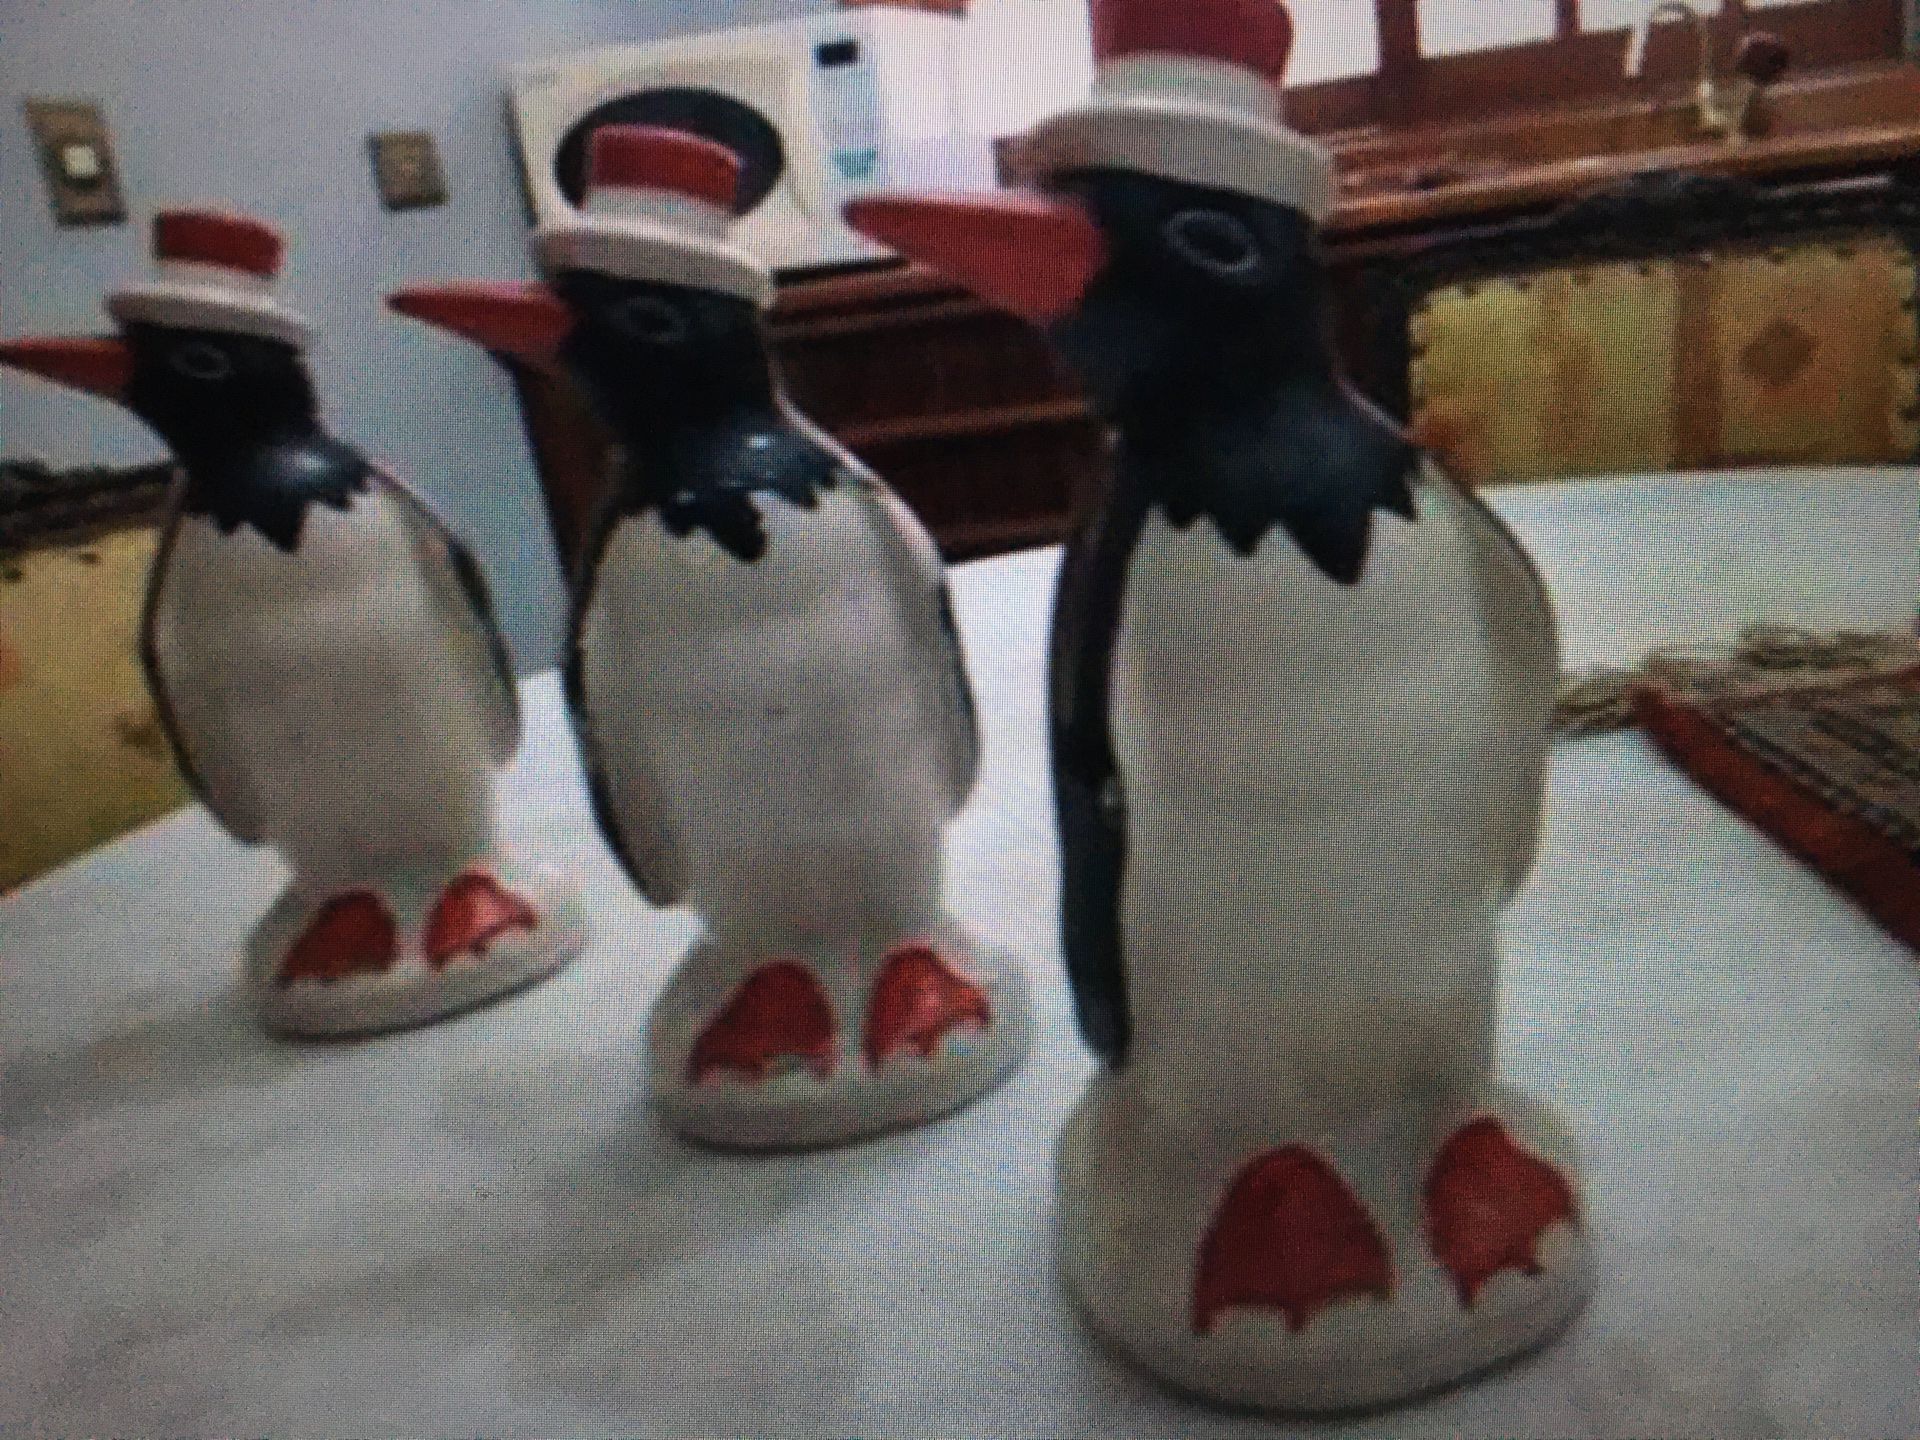 Penguin rare in porcelain antique 2 statues 9,5” tall for collection